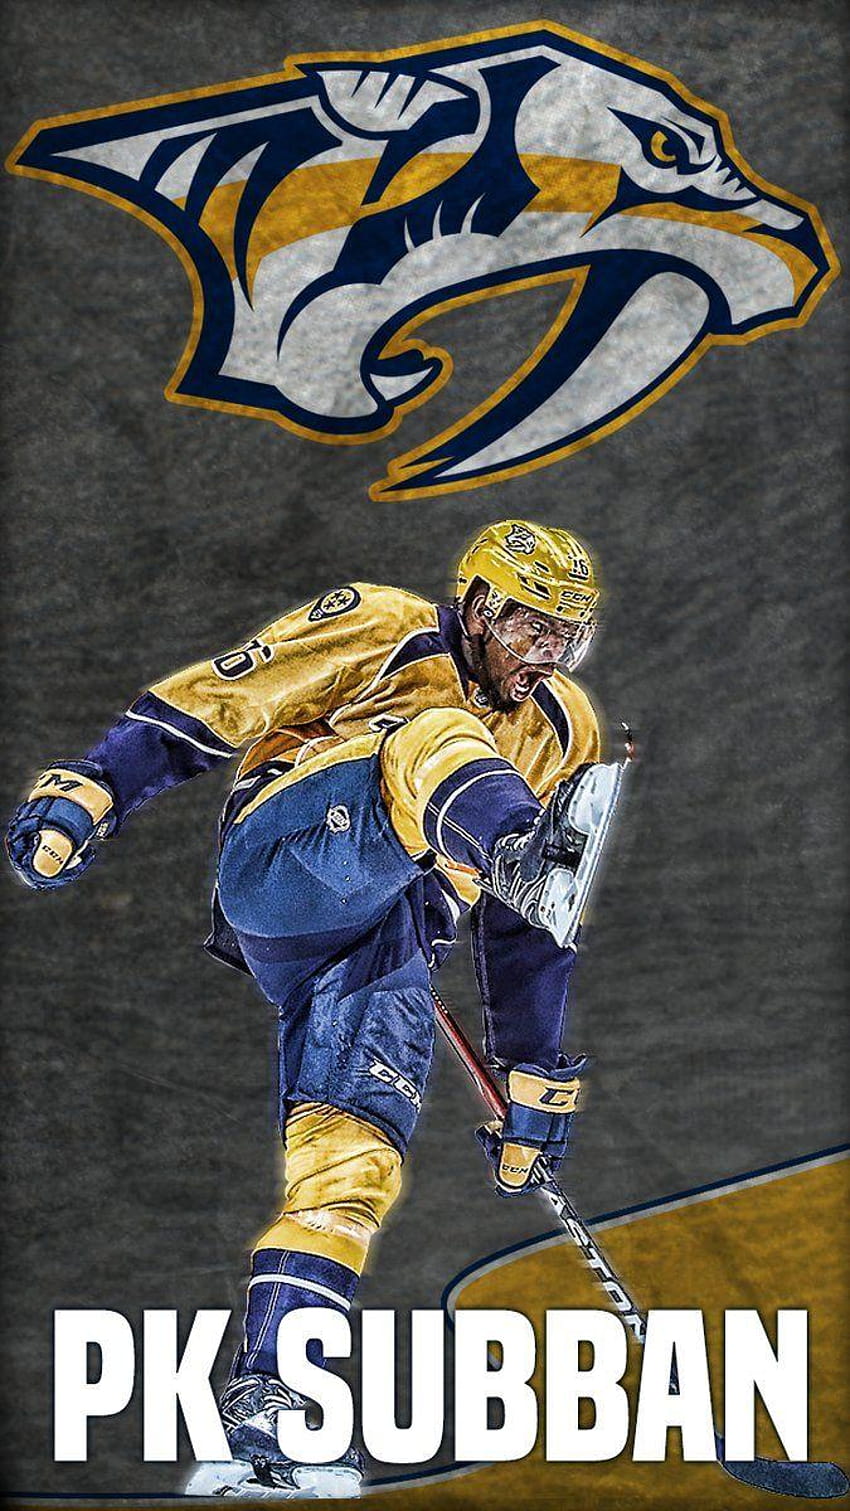 Long Ago Somebody Left With The Cup on, p k subban HD phone wallpaper